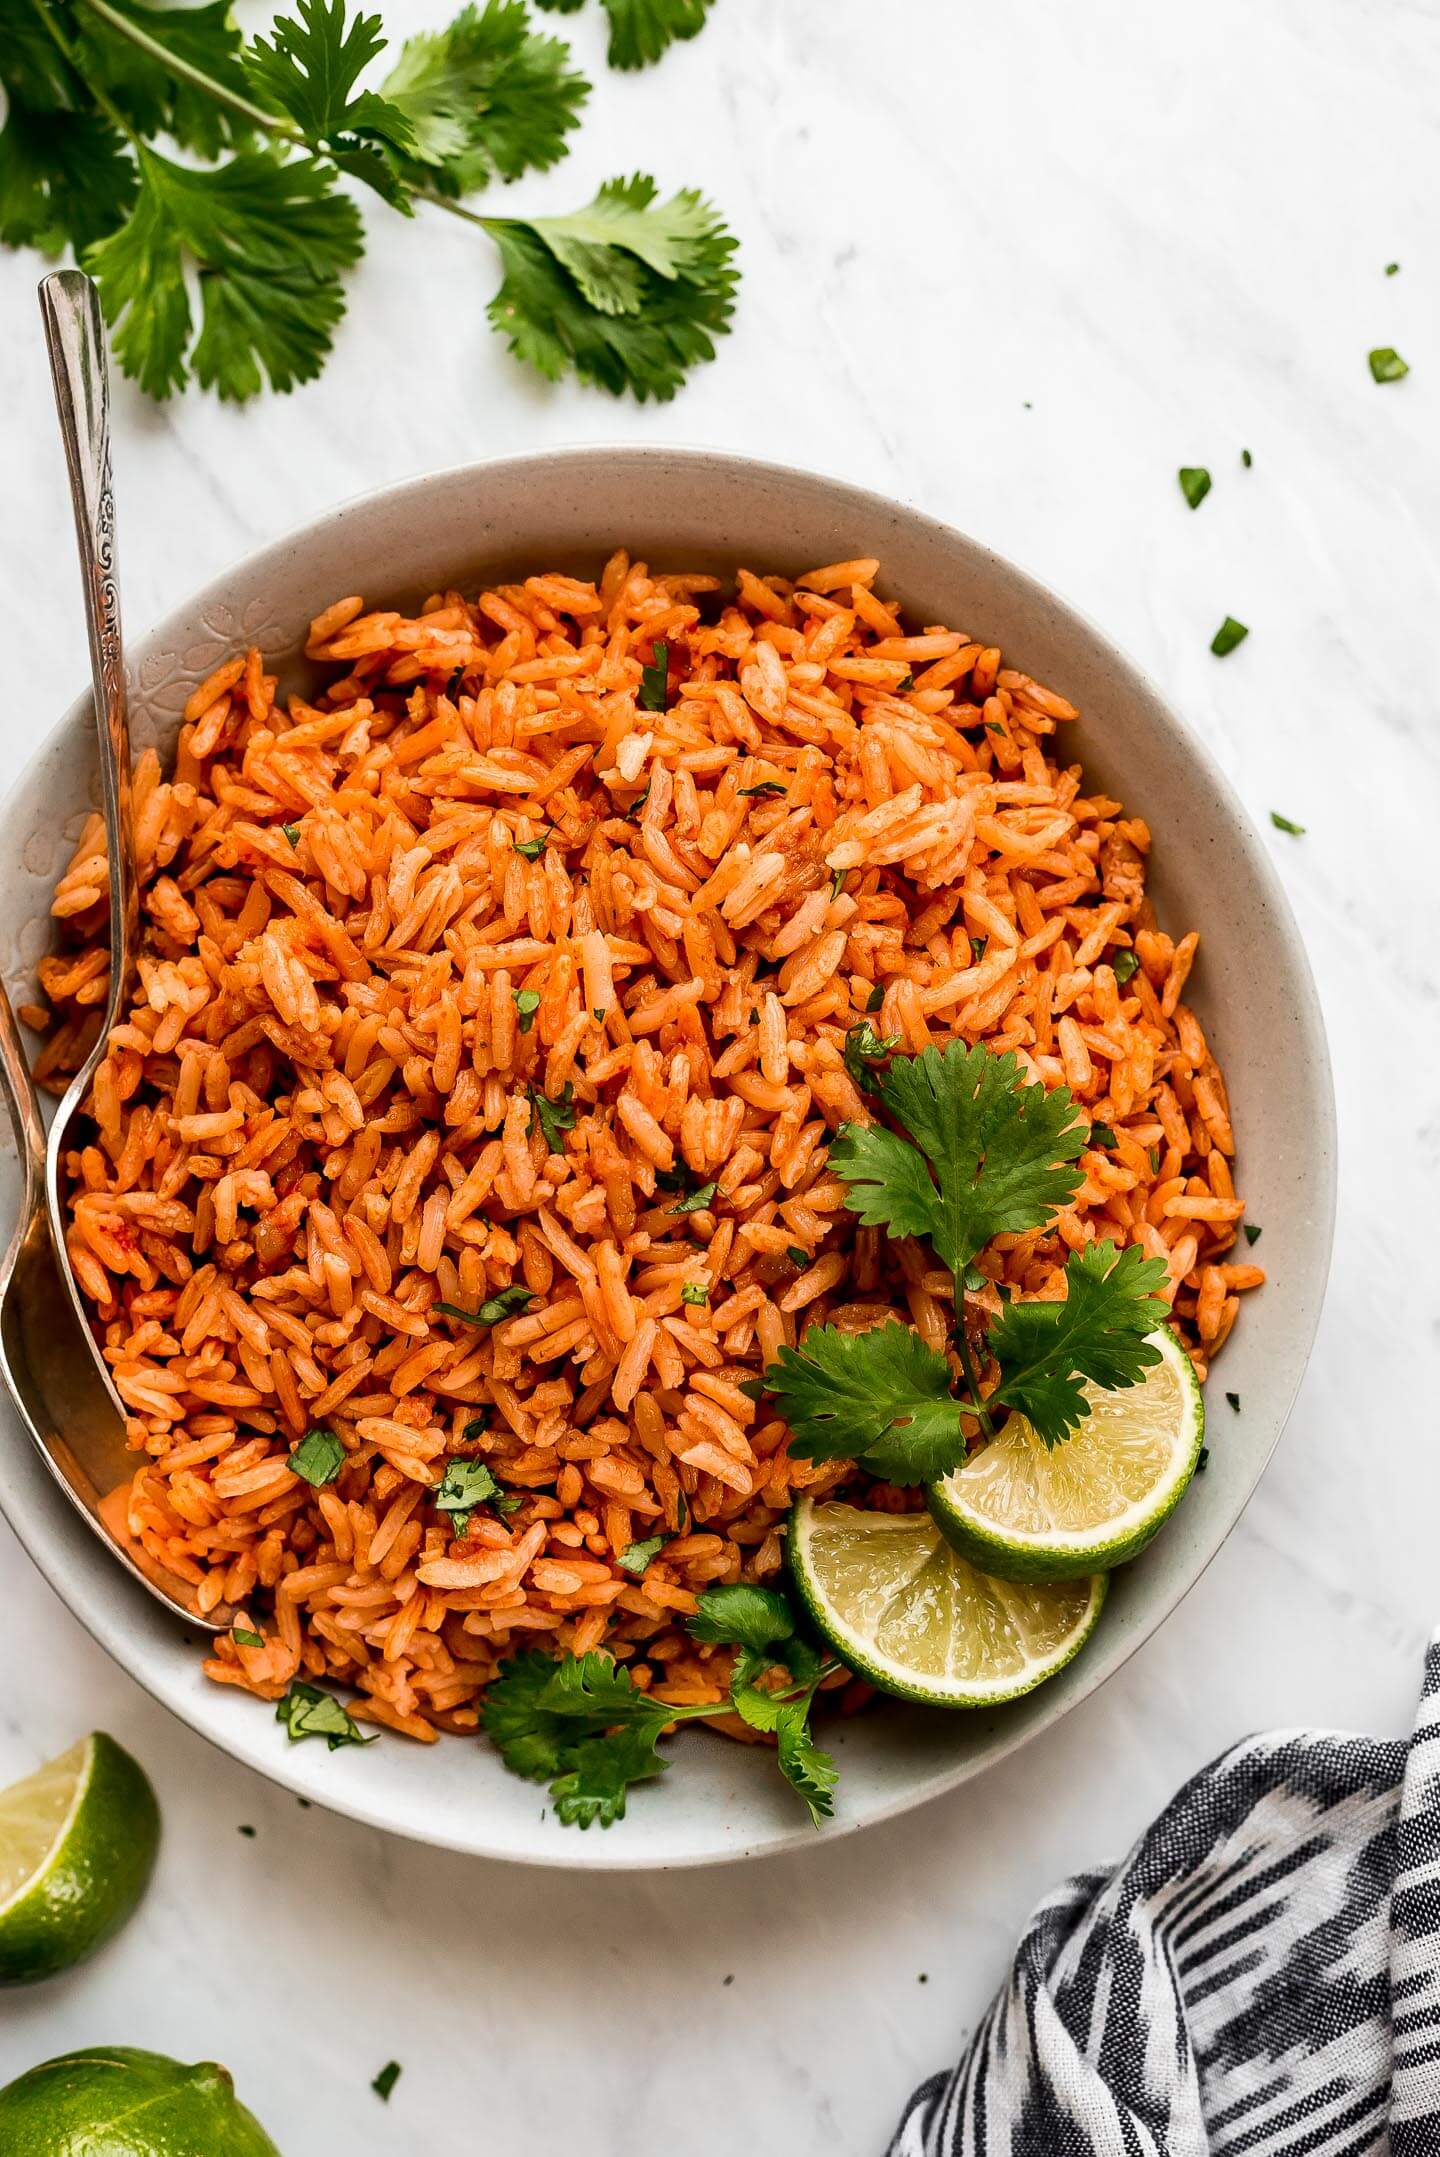 A bowl of Spanish Rice garnished with cilantro and lime wedges on the side.